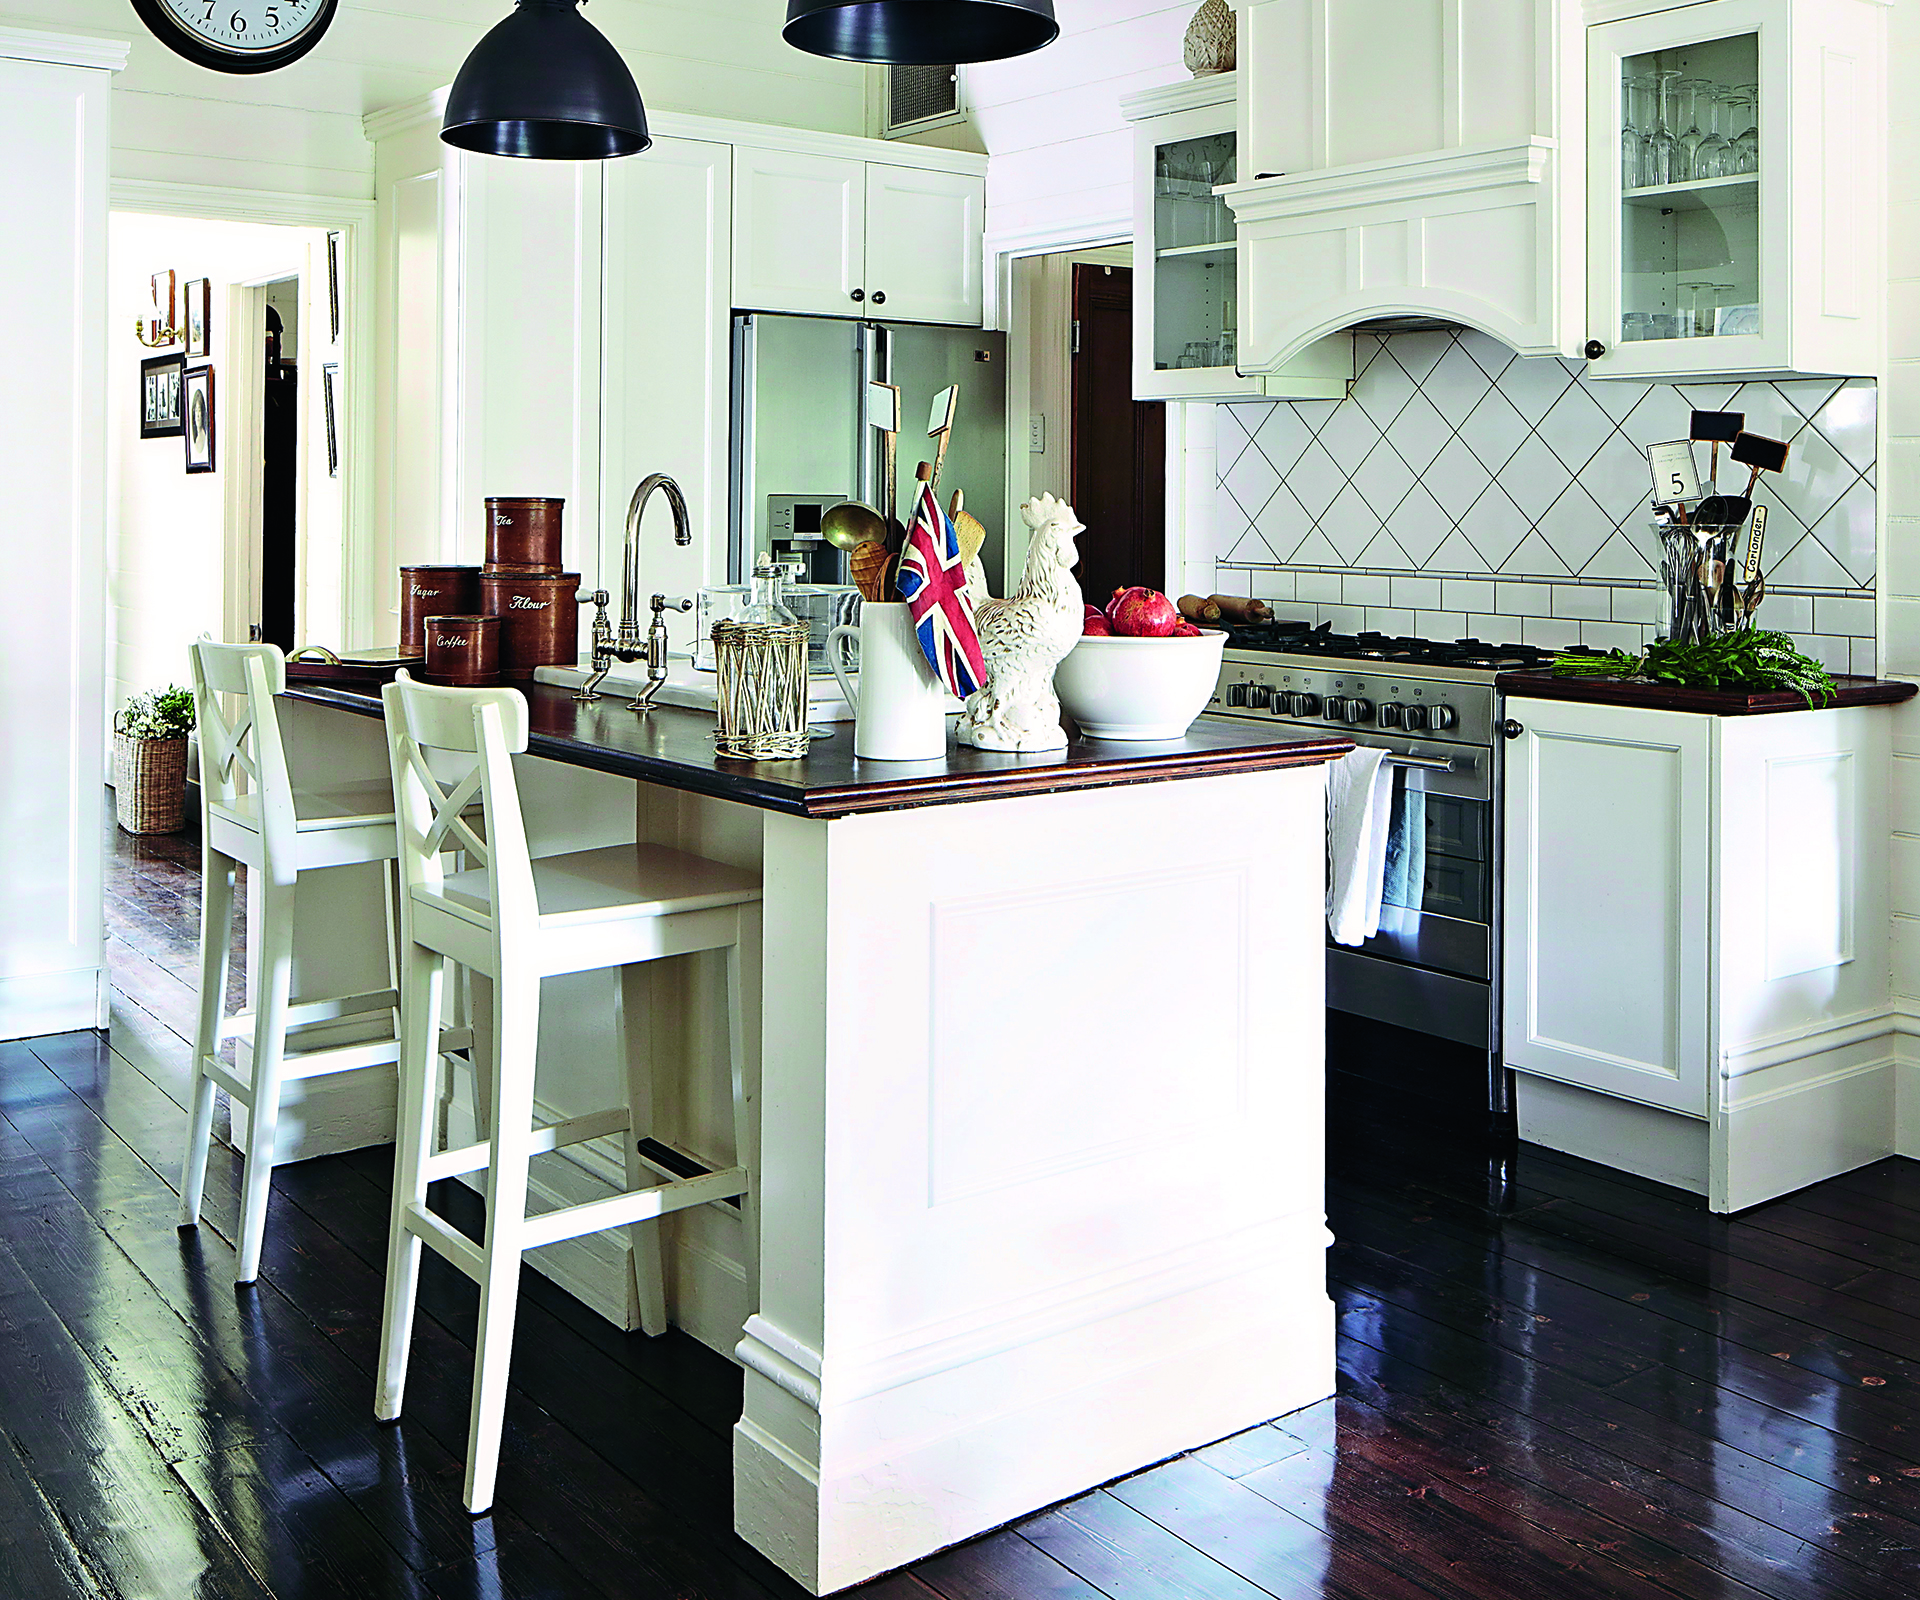 Budget tips for a kitchen makeover